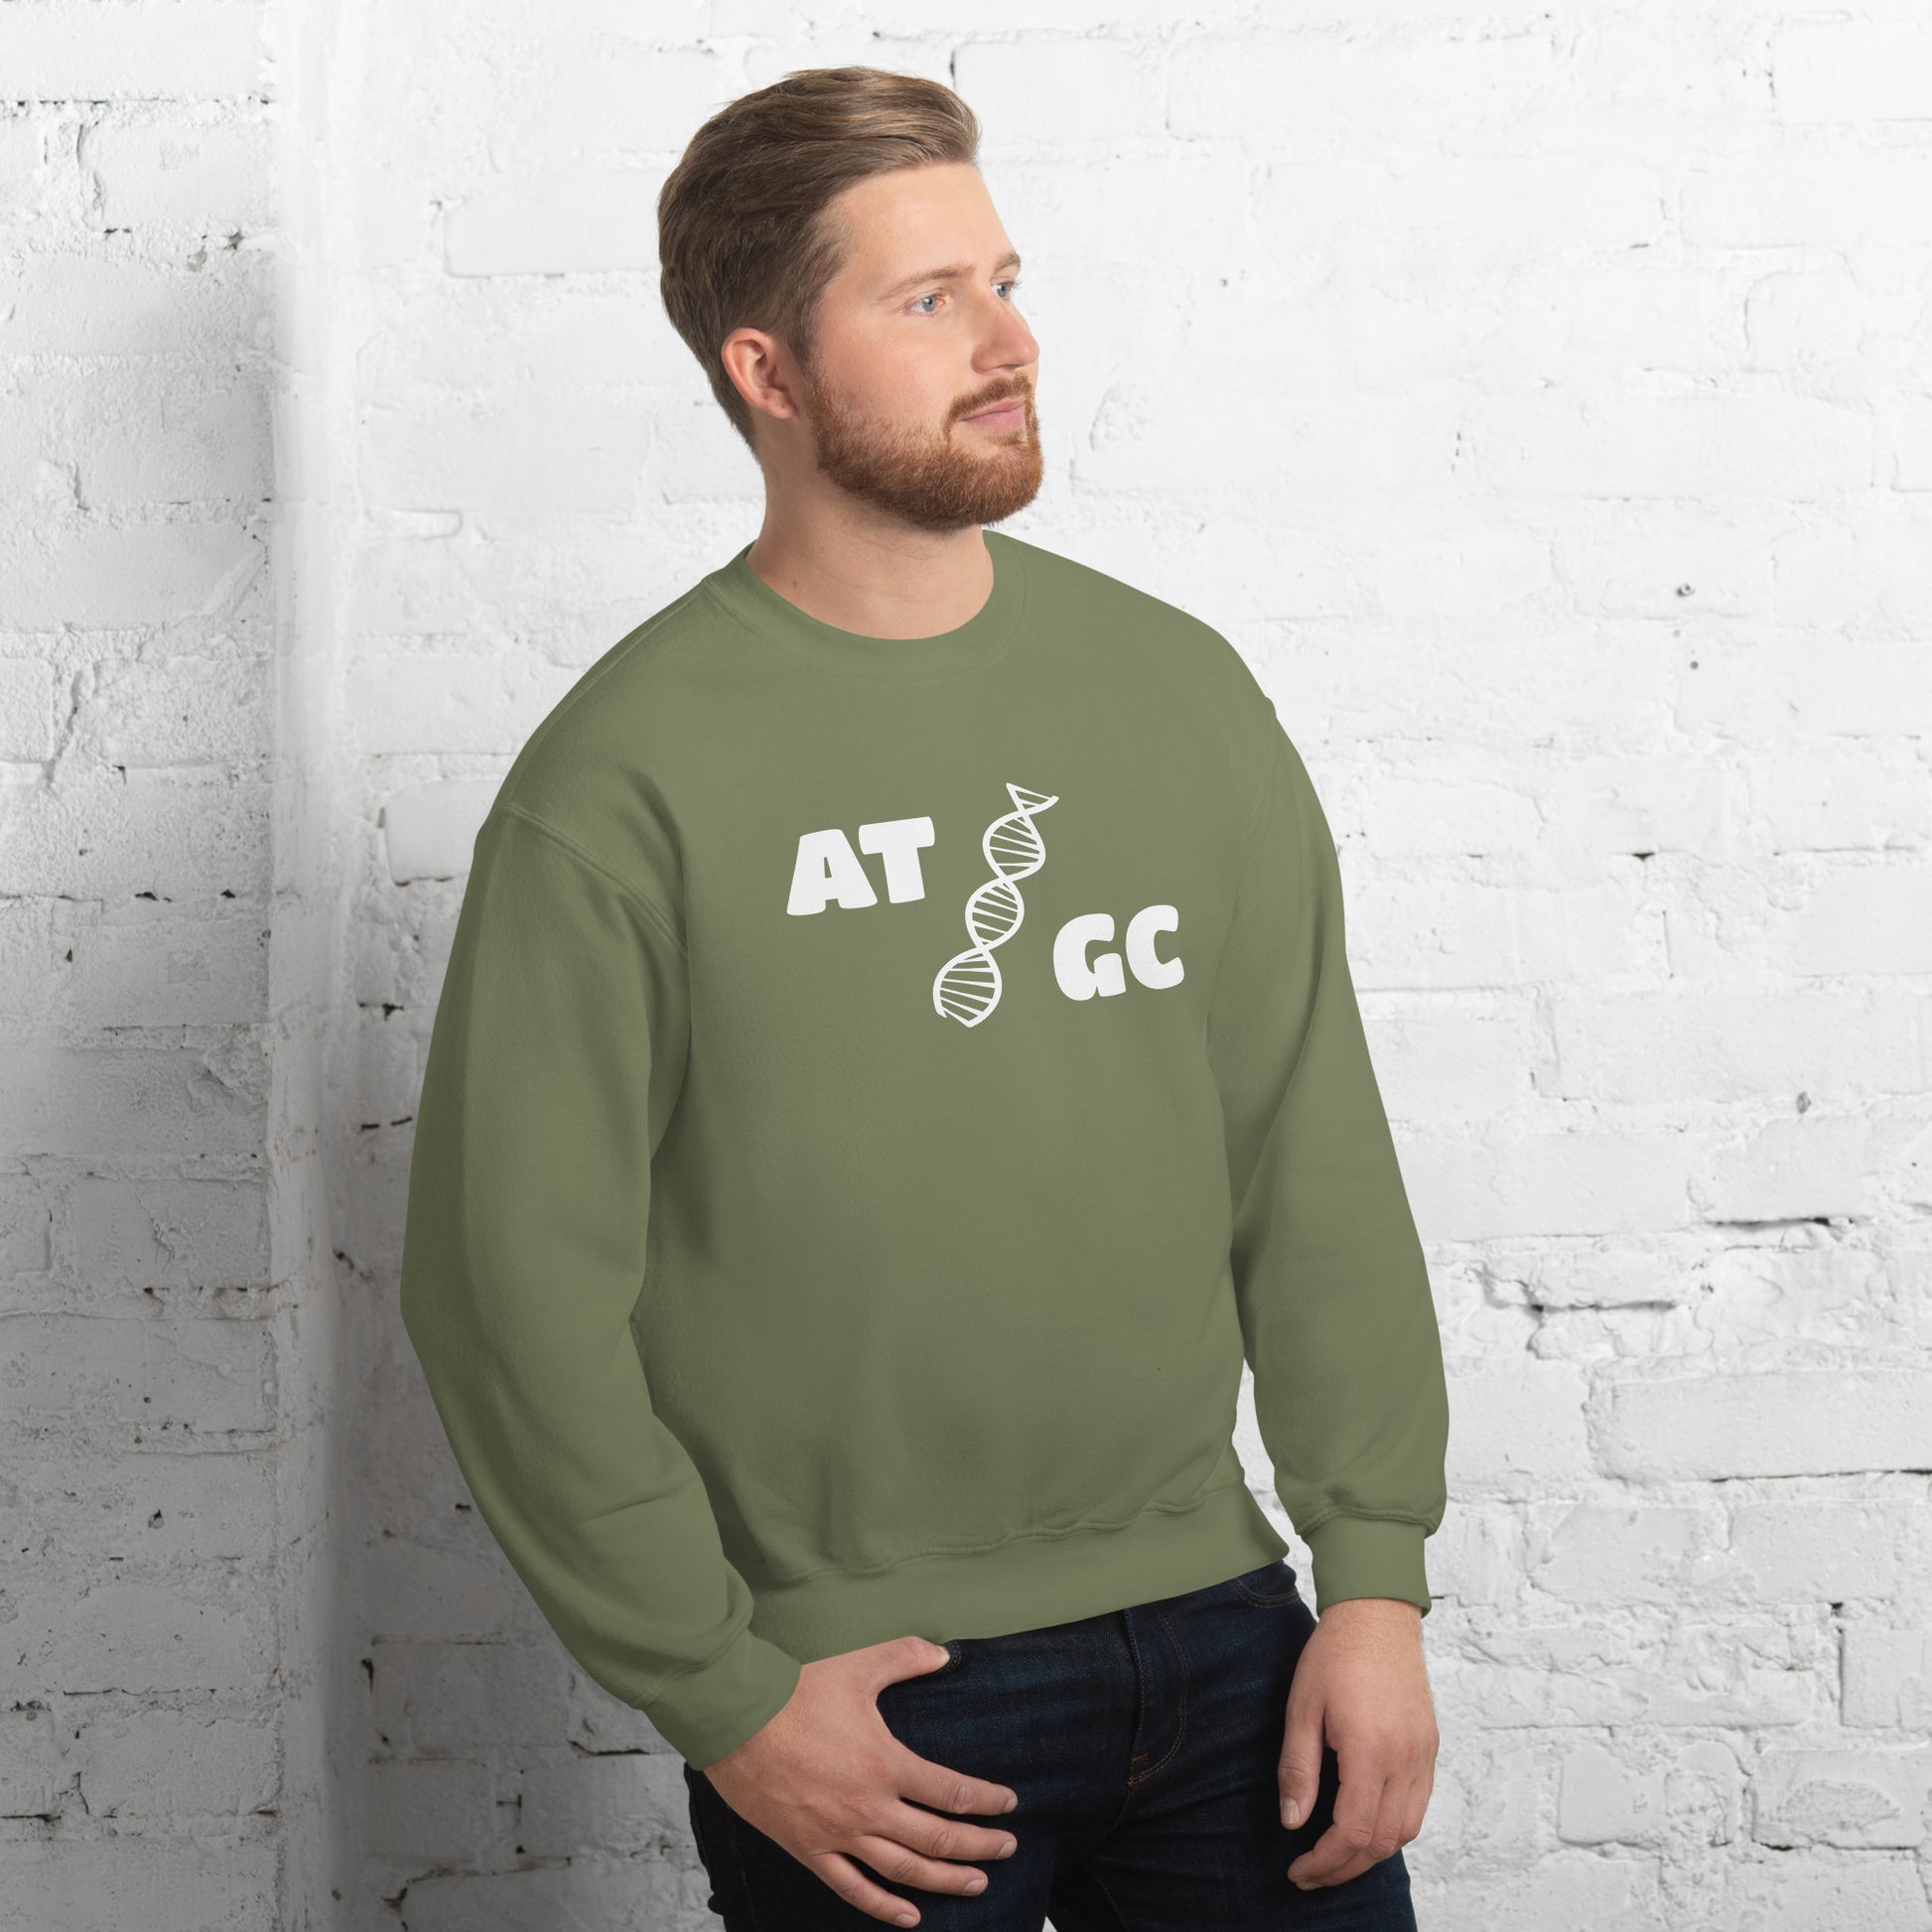 Men with military green sweatshirt with image of a DNA string and the text "ATGC"